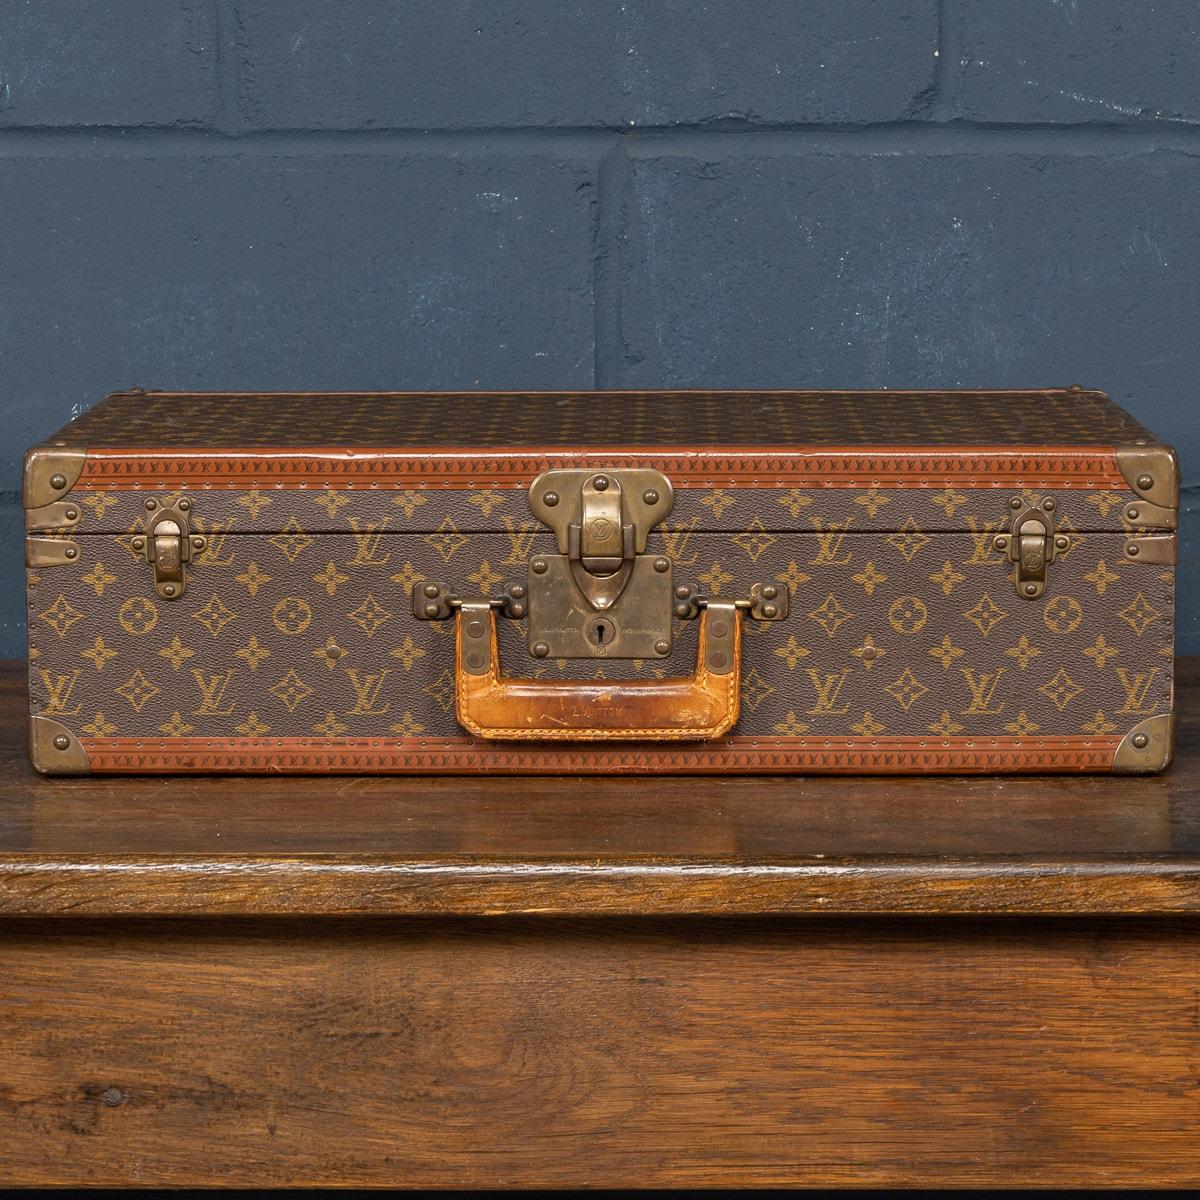 A charming Louis Vuitton hard-sided case, mid to late 20th century, the exterior finished in the famous monogram canvas with brass fittings. A great piece for use today or as a decorative item for the home.

CONDITION
In Good Overall Vintage